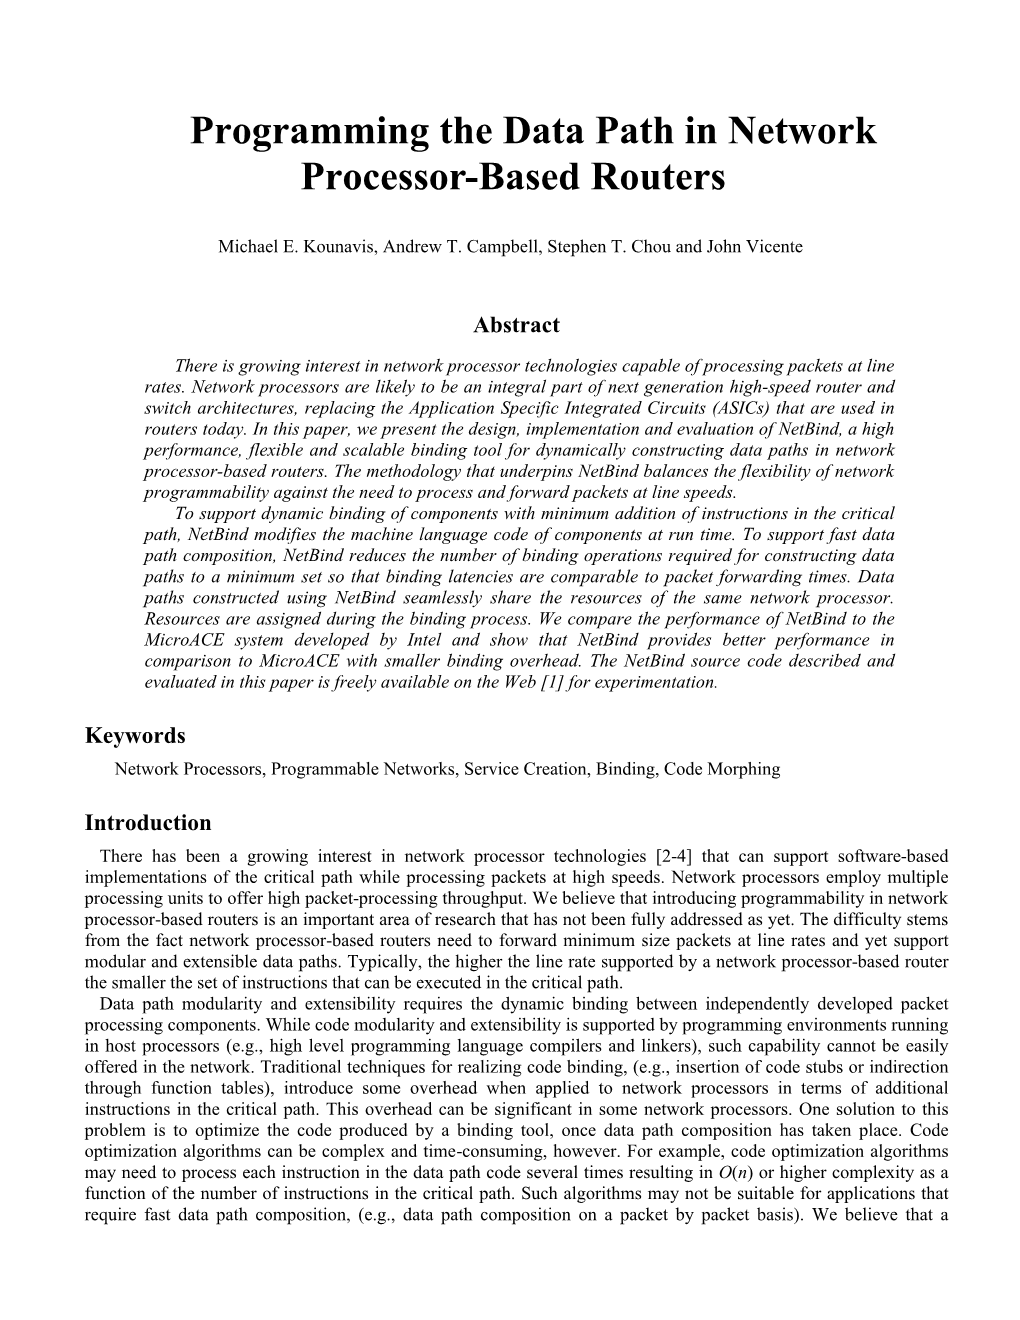 Programming the Data Path in Network Processor-Based Routers